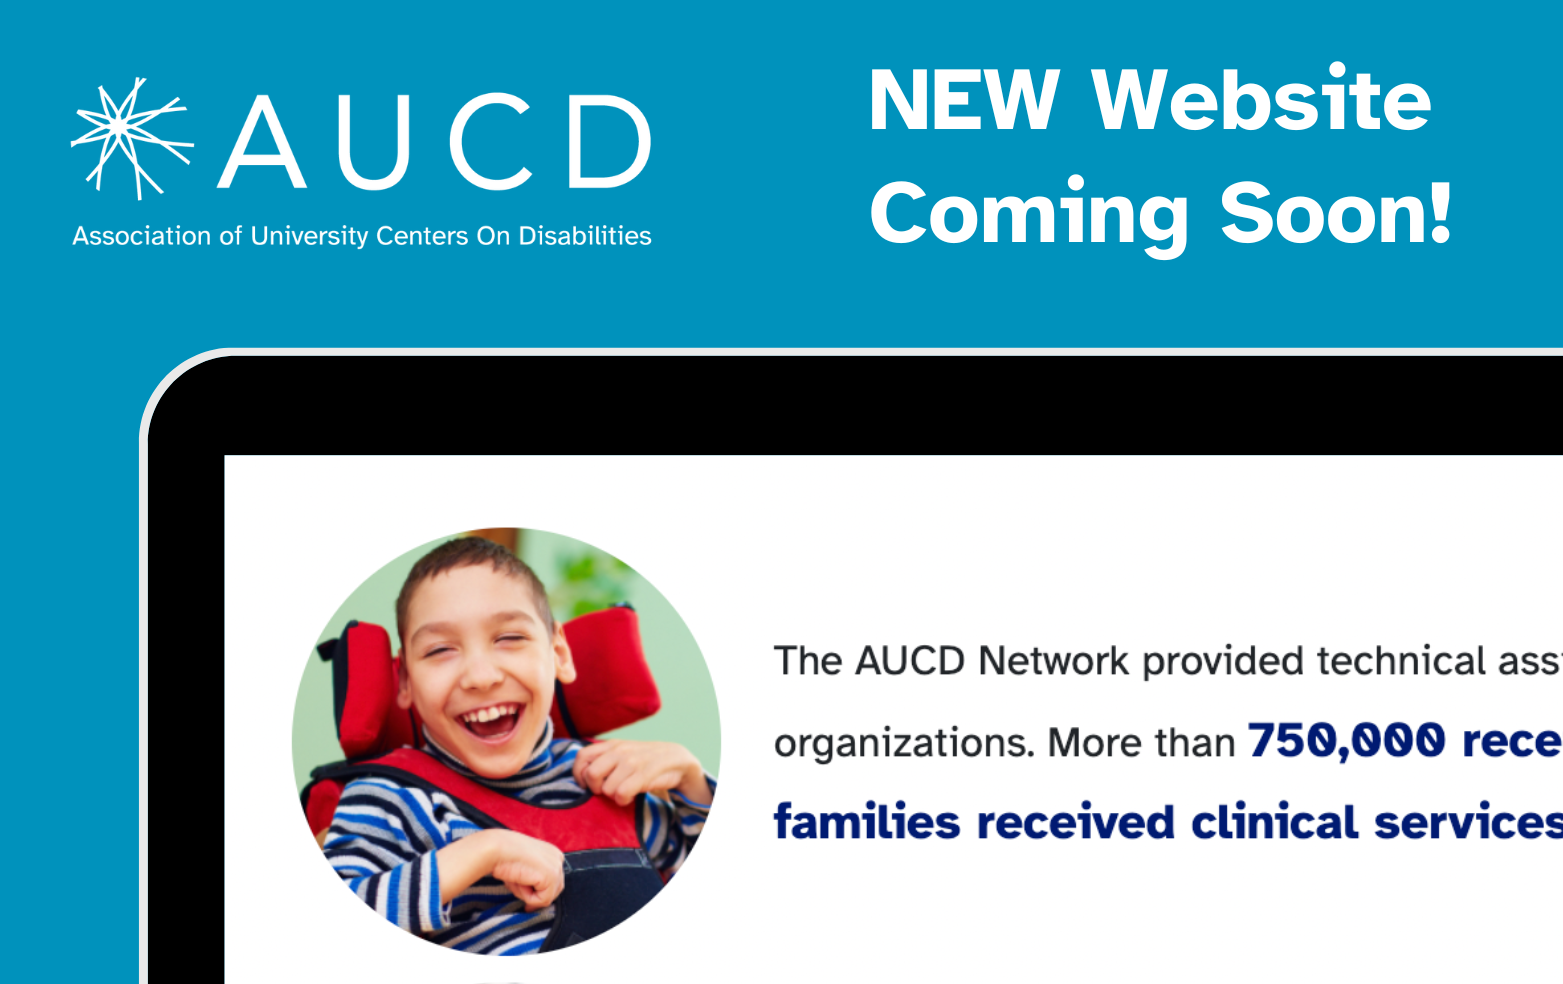 Zoom-in image of a computer screen with a child in a wheelchair smiling at the camera. Text: AUCD Association of University Centers on Disabilities. The AUCD Network provided technical assistance to nearly 2 million people and organizations. More than 750,000 received continuing education and 155,000 families received clinical services such as an assessment or therapy.